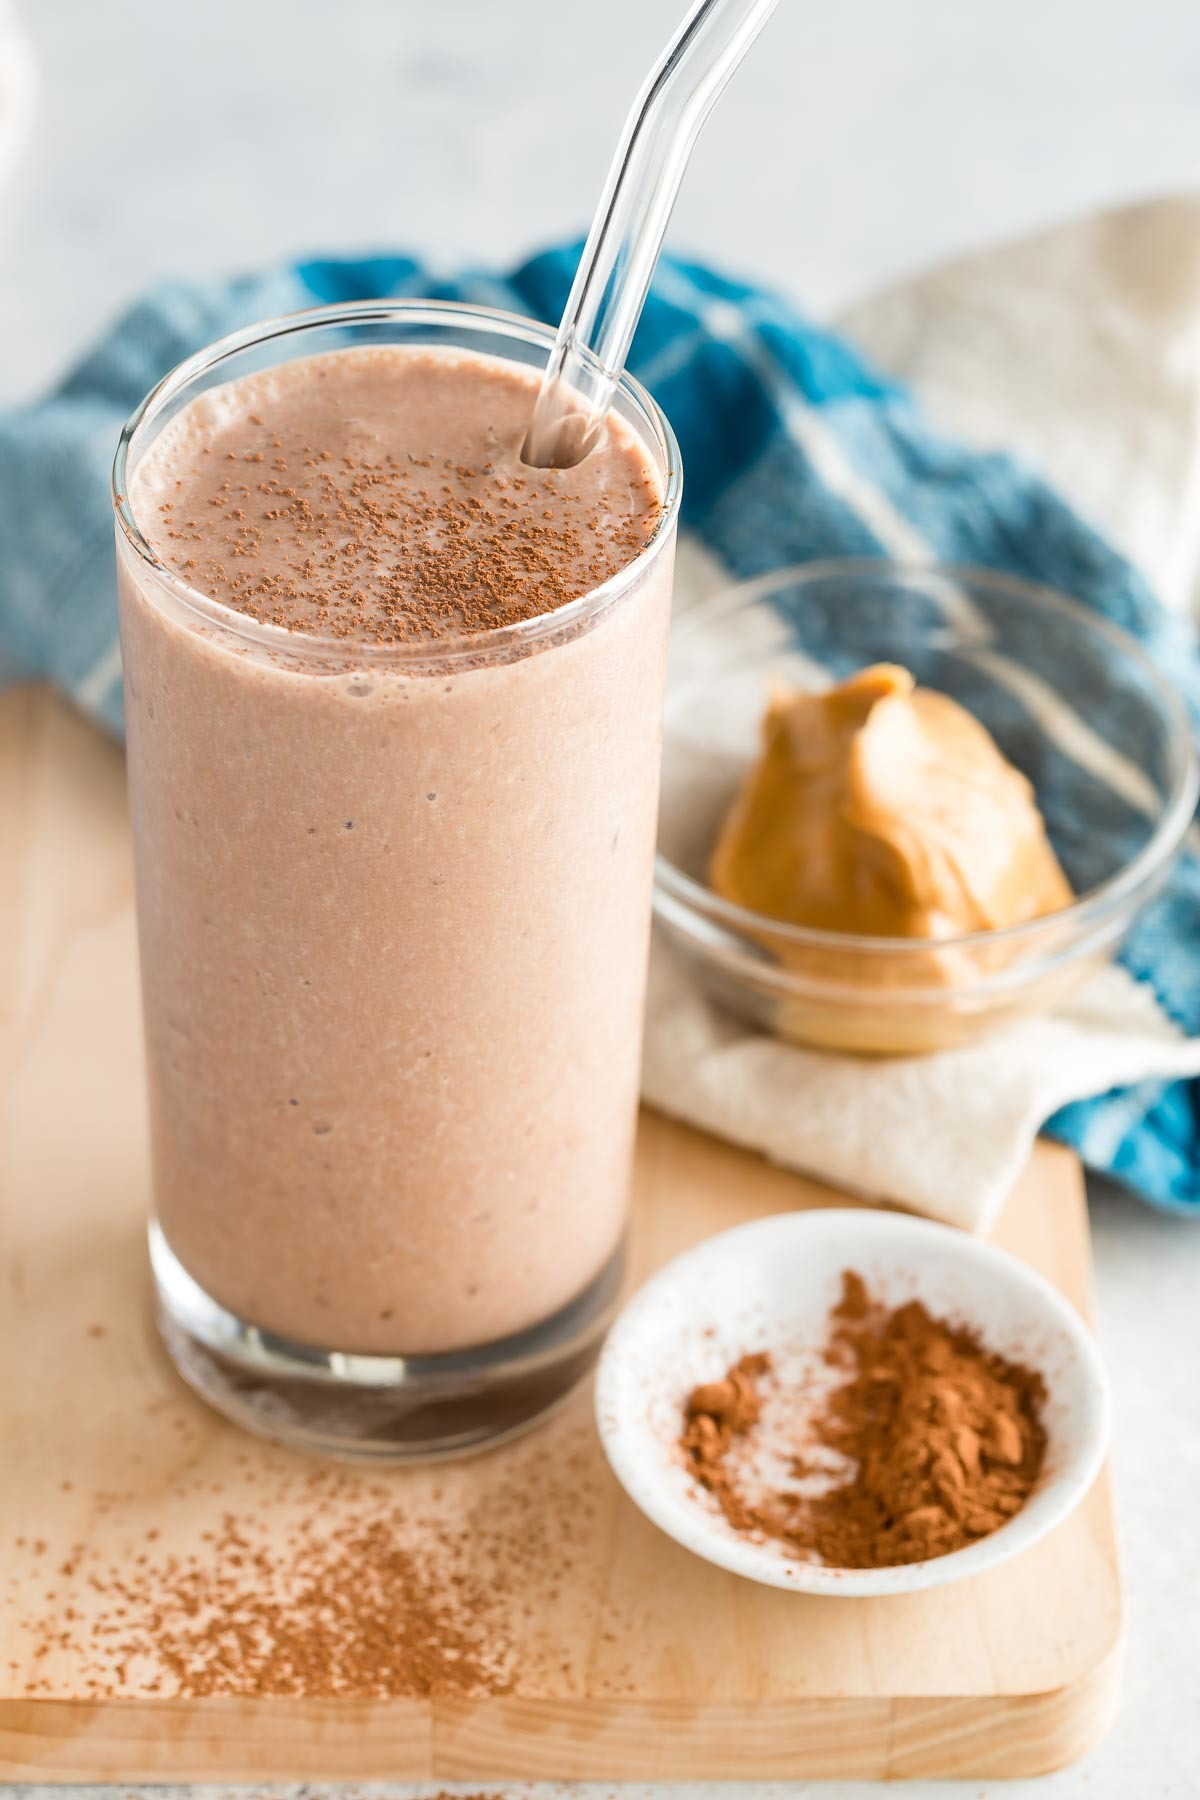 Peanut Butter Smoothie Recipes
 Chocolate Peanut Butter Smoothie